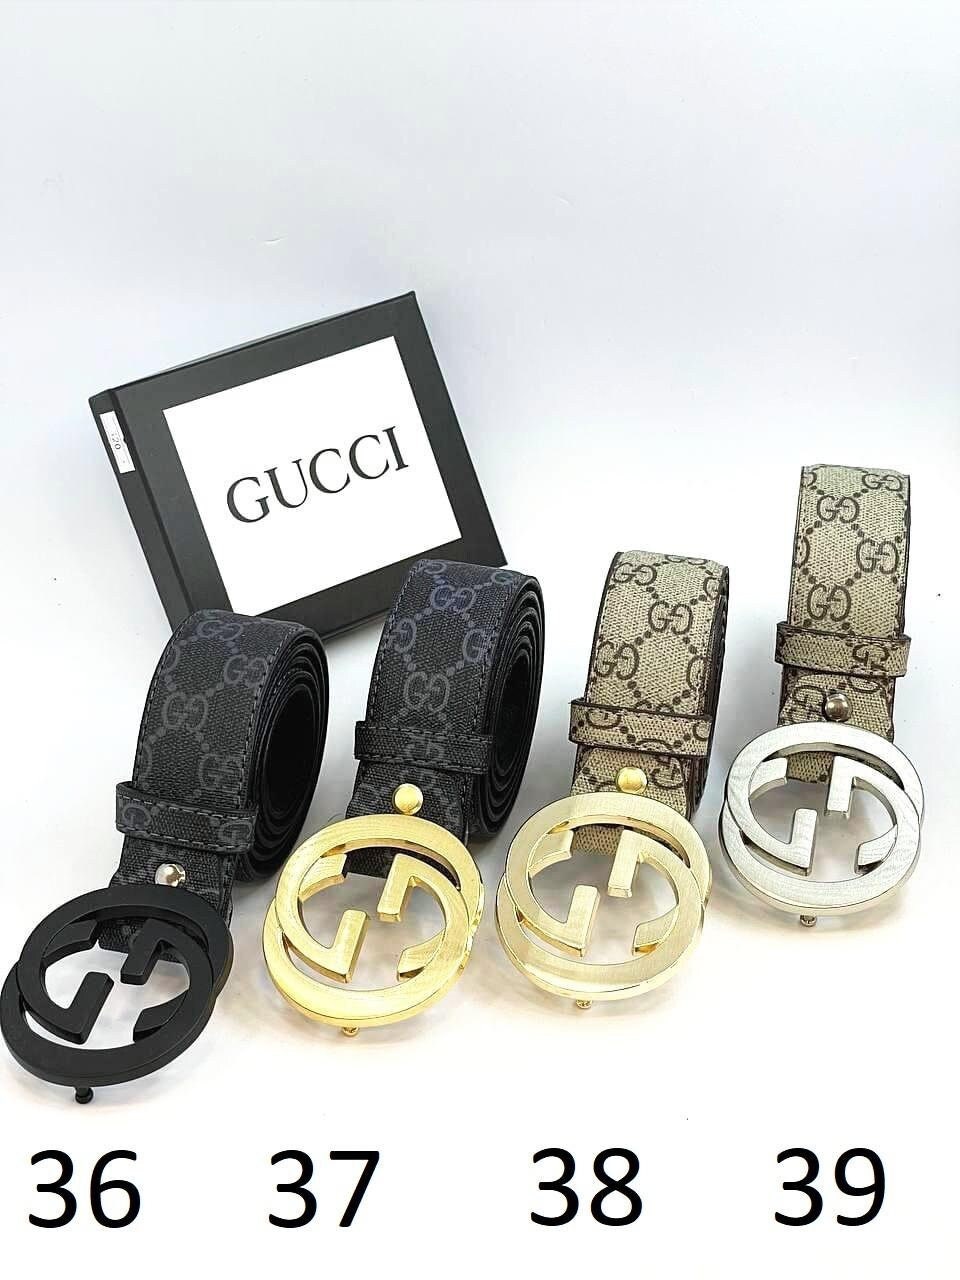 Hermes Gucci Chanel - Etsy